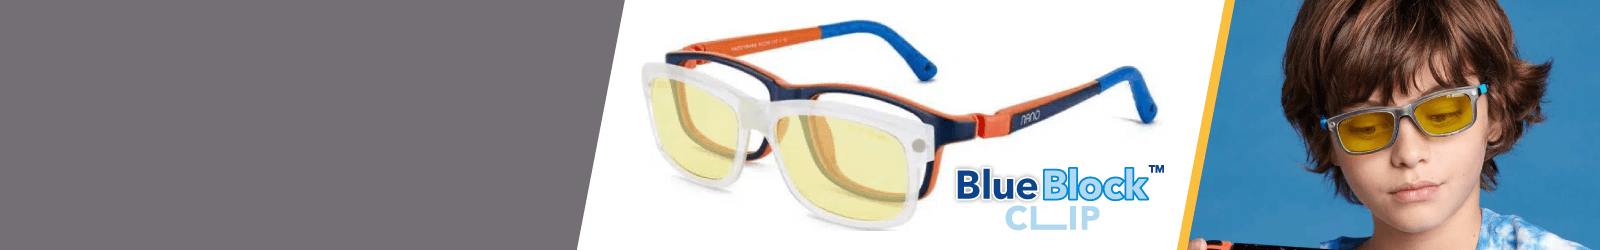 Nano Blue Block Clip Eyewear for Kids from 2 to 4-year-old